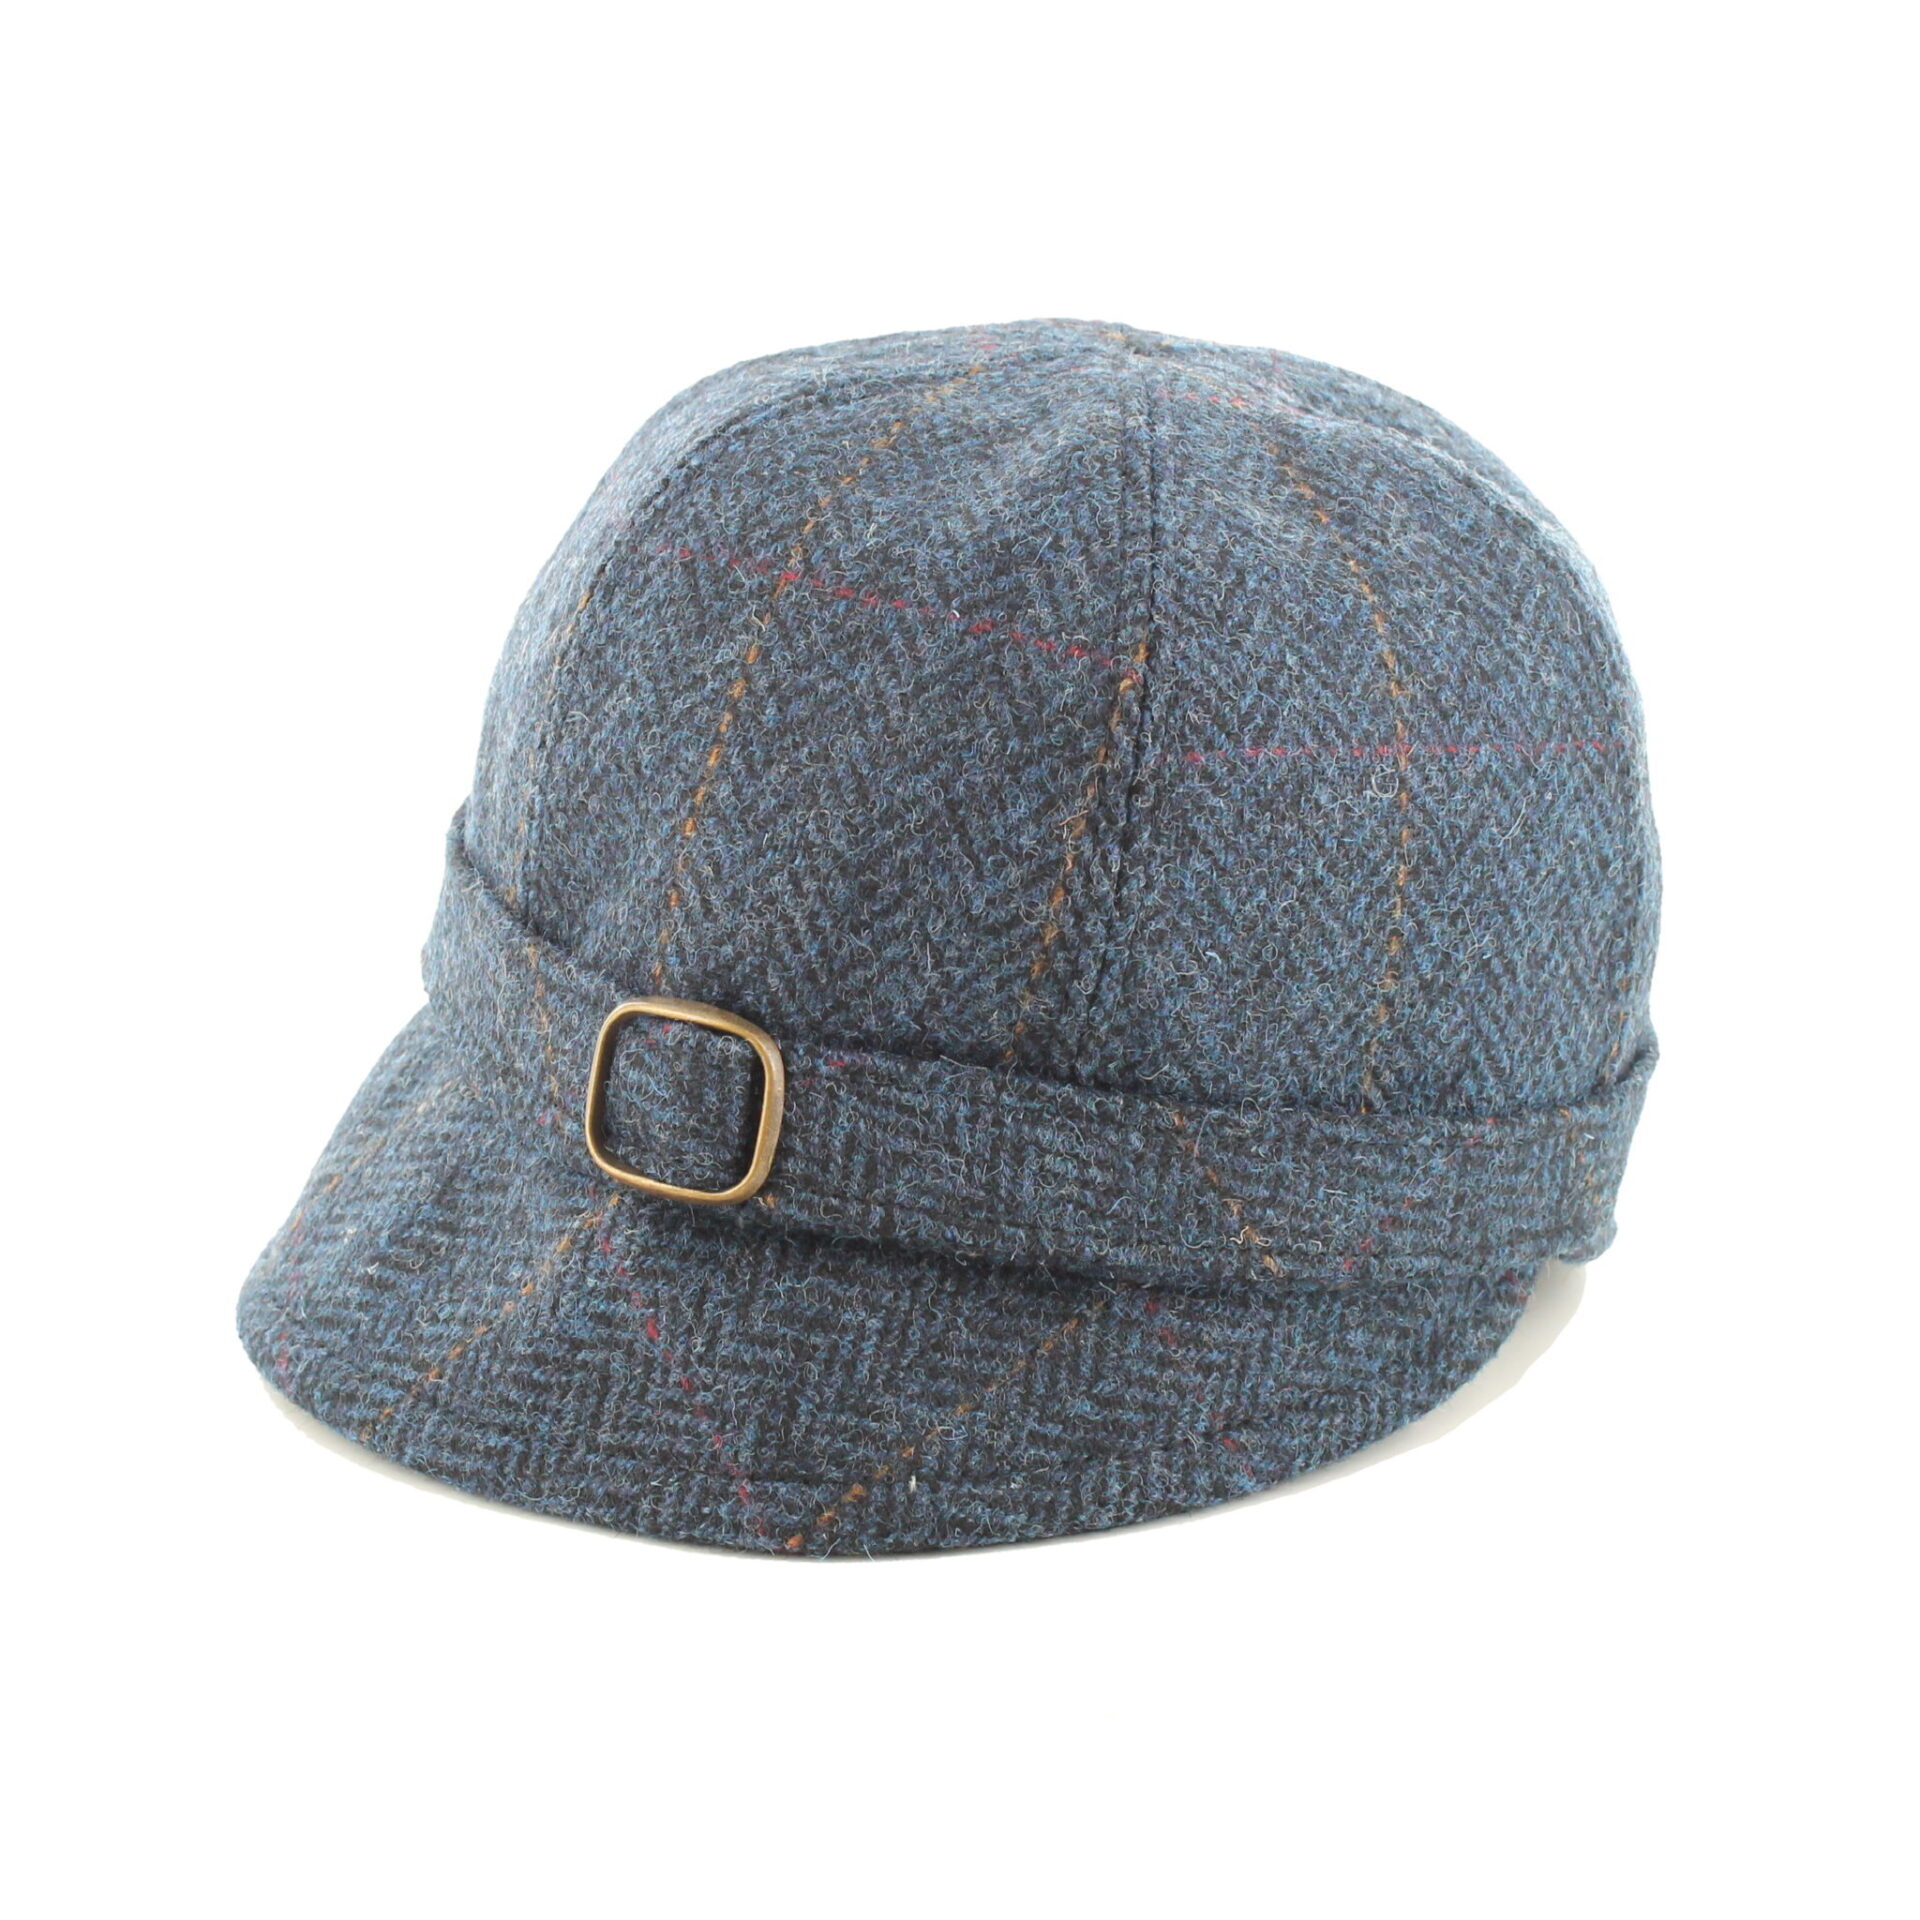 A blue hat with a buckle on the side.